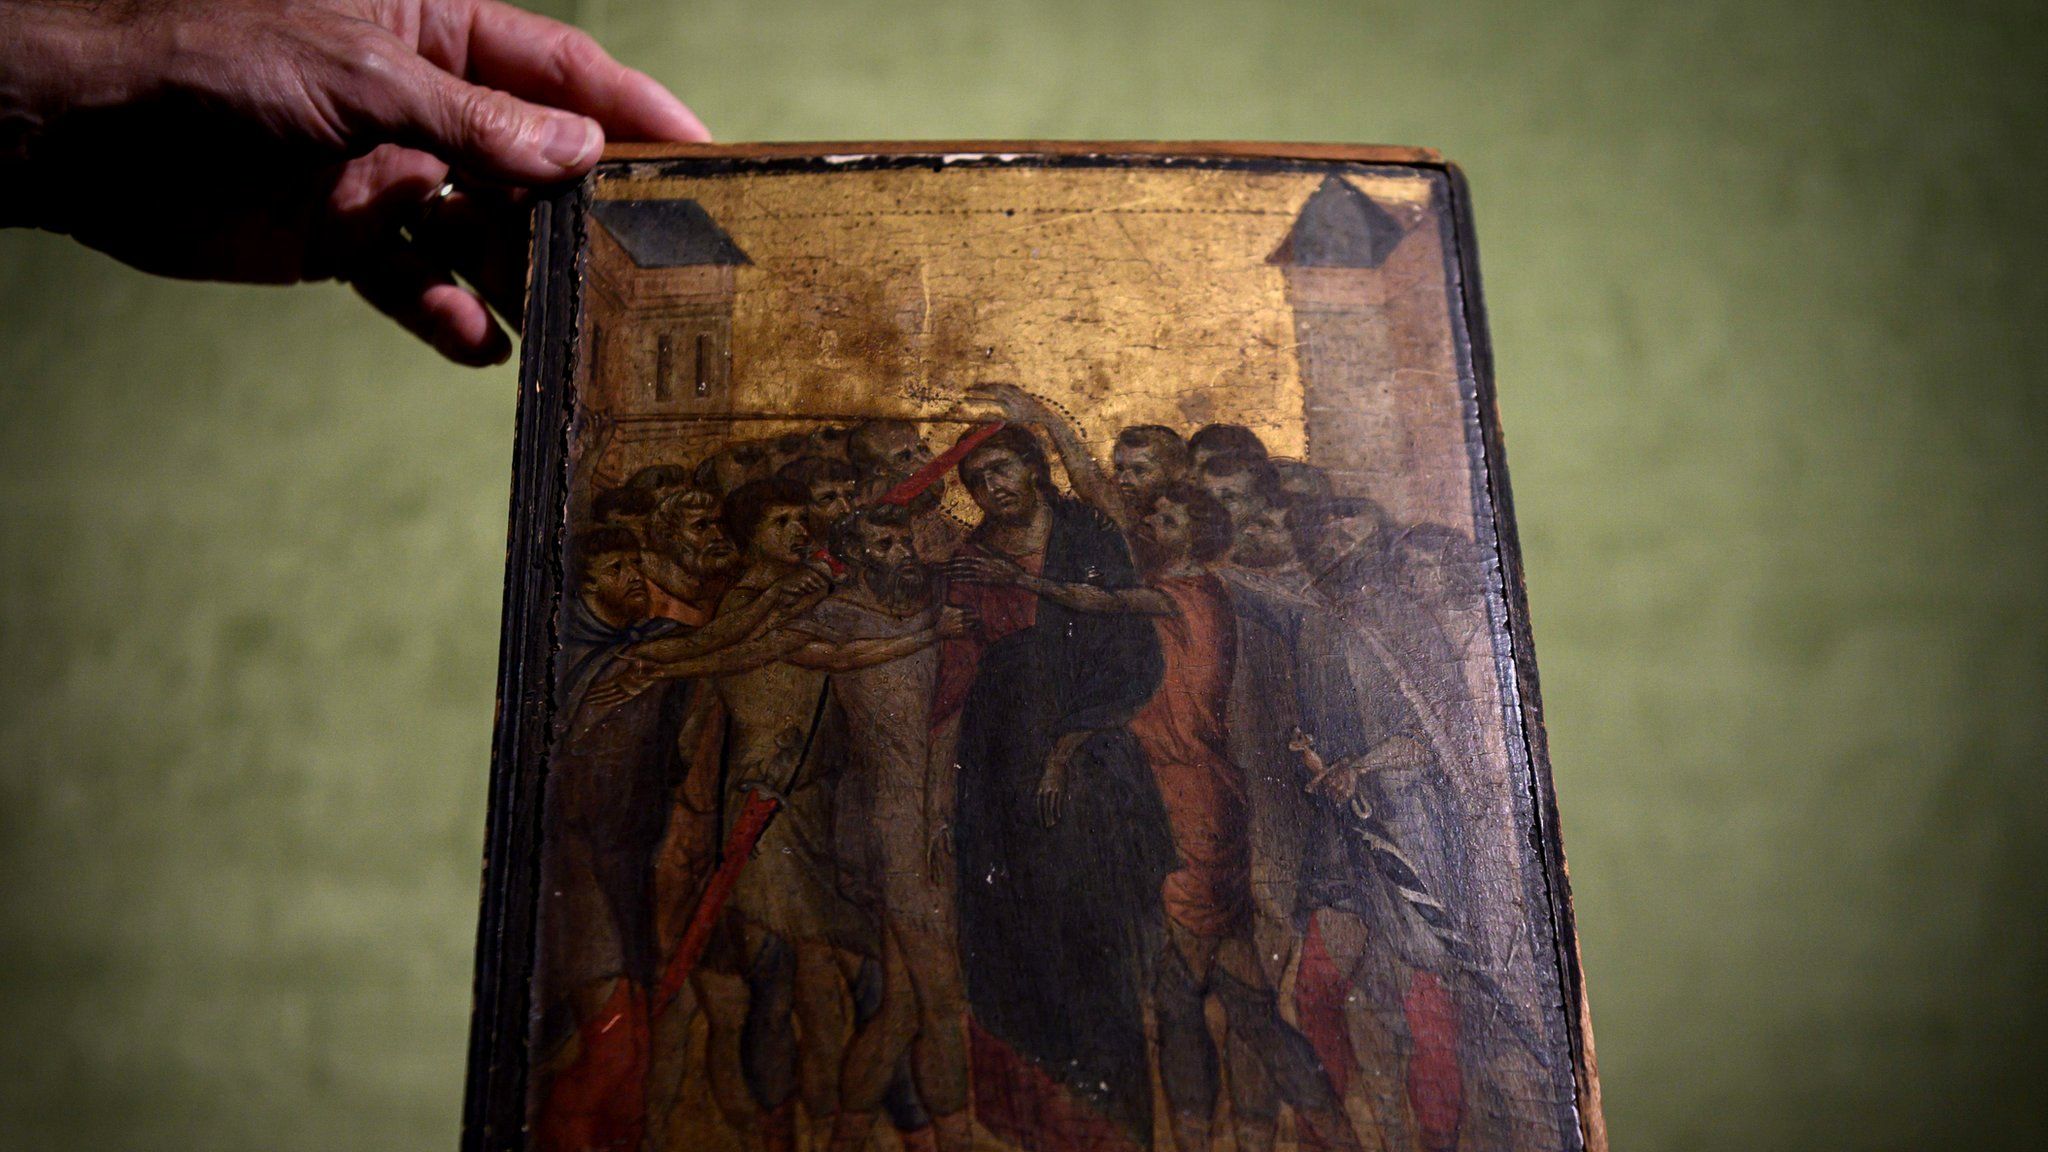 A painting entitled "Christ Mocked" by the late 13th Century Florentine artist Cenni di Pepo, also known as Cimabue, 23 September 2019